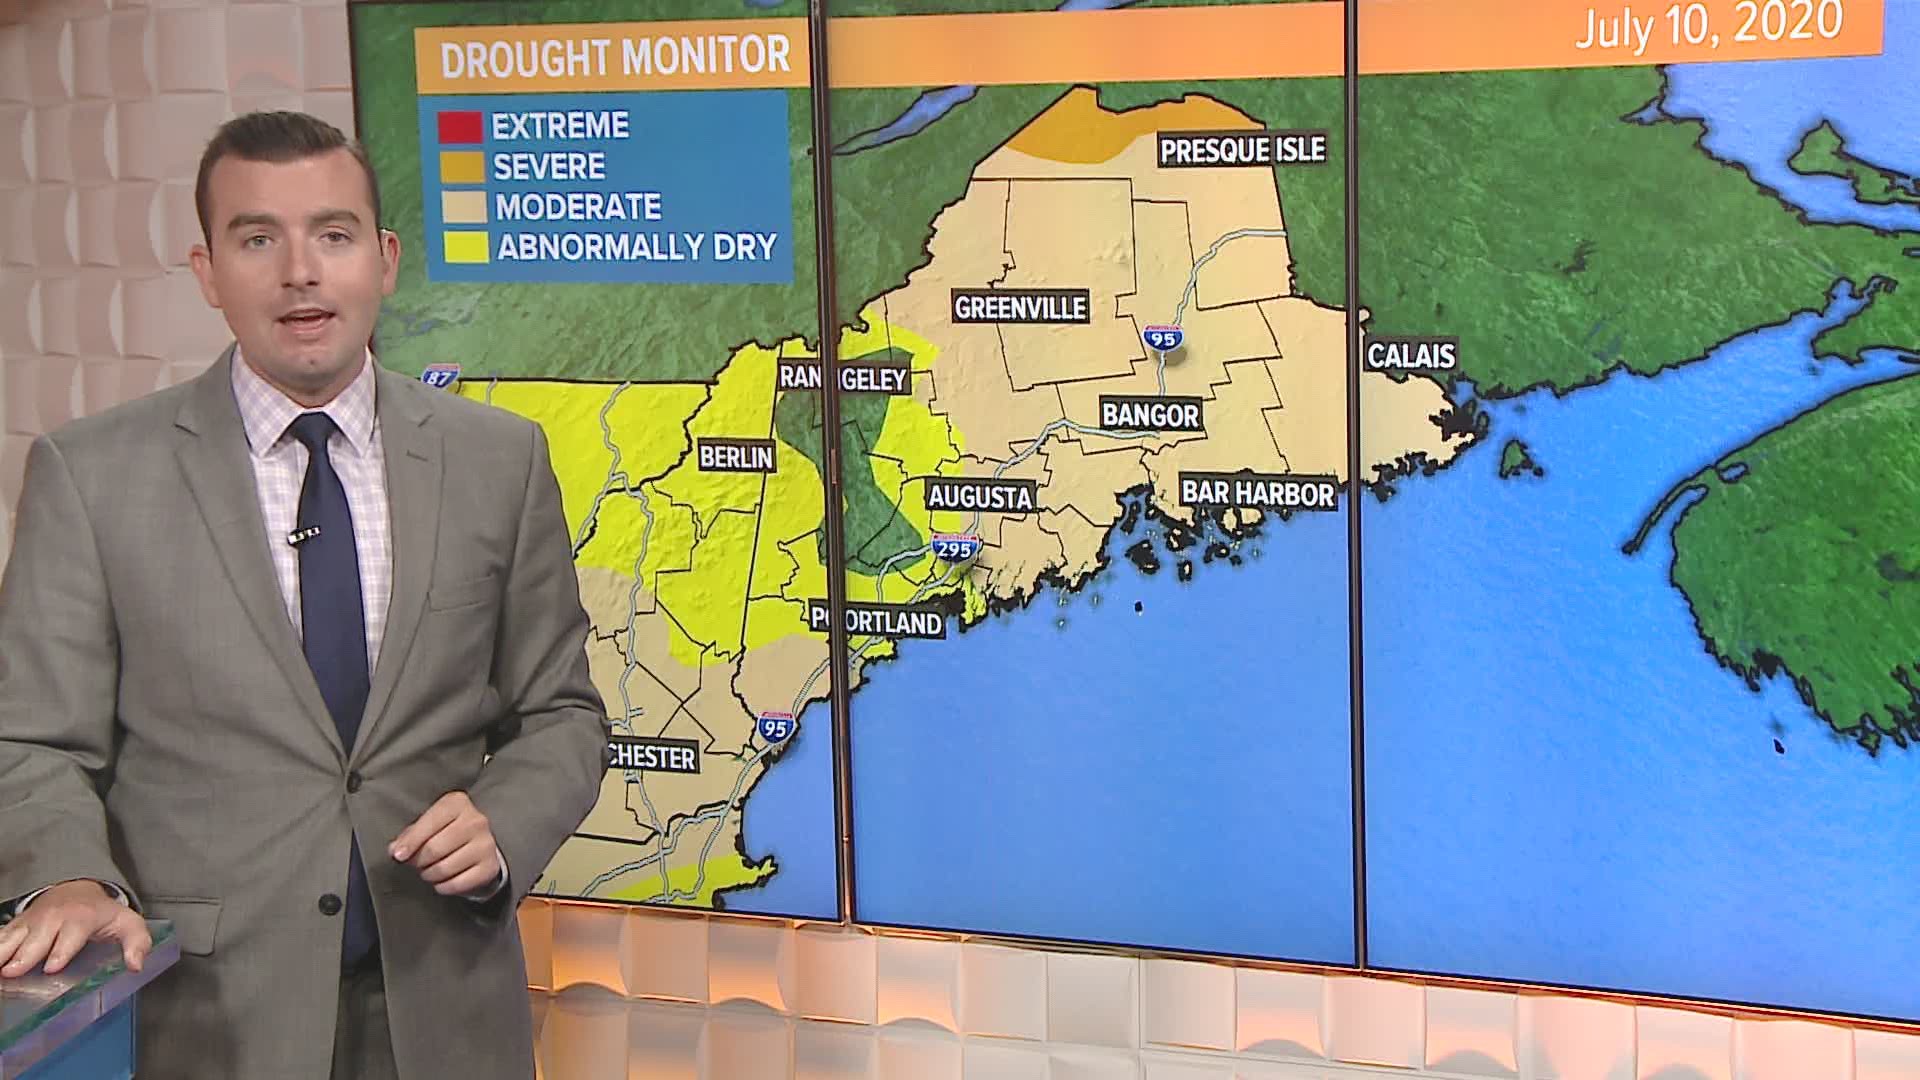 Late spring was very dry in Maine, but a wet start to summer is providing needed rainfall and a growing dent in the drought.